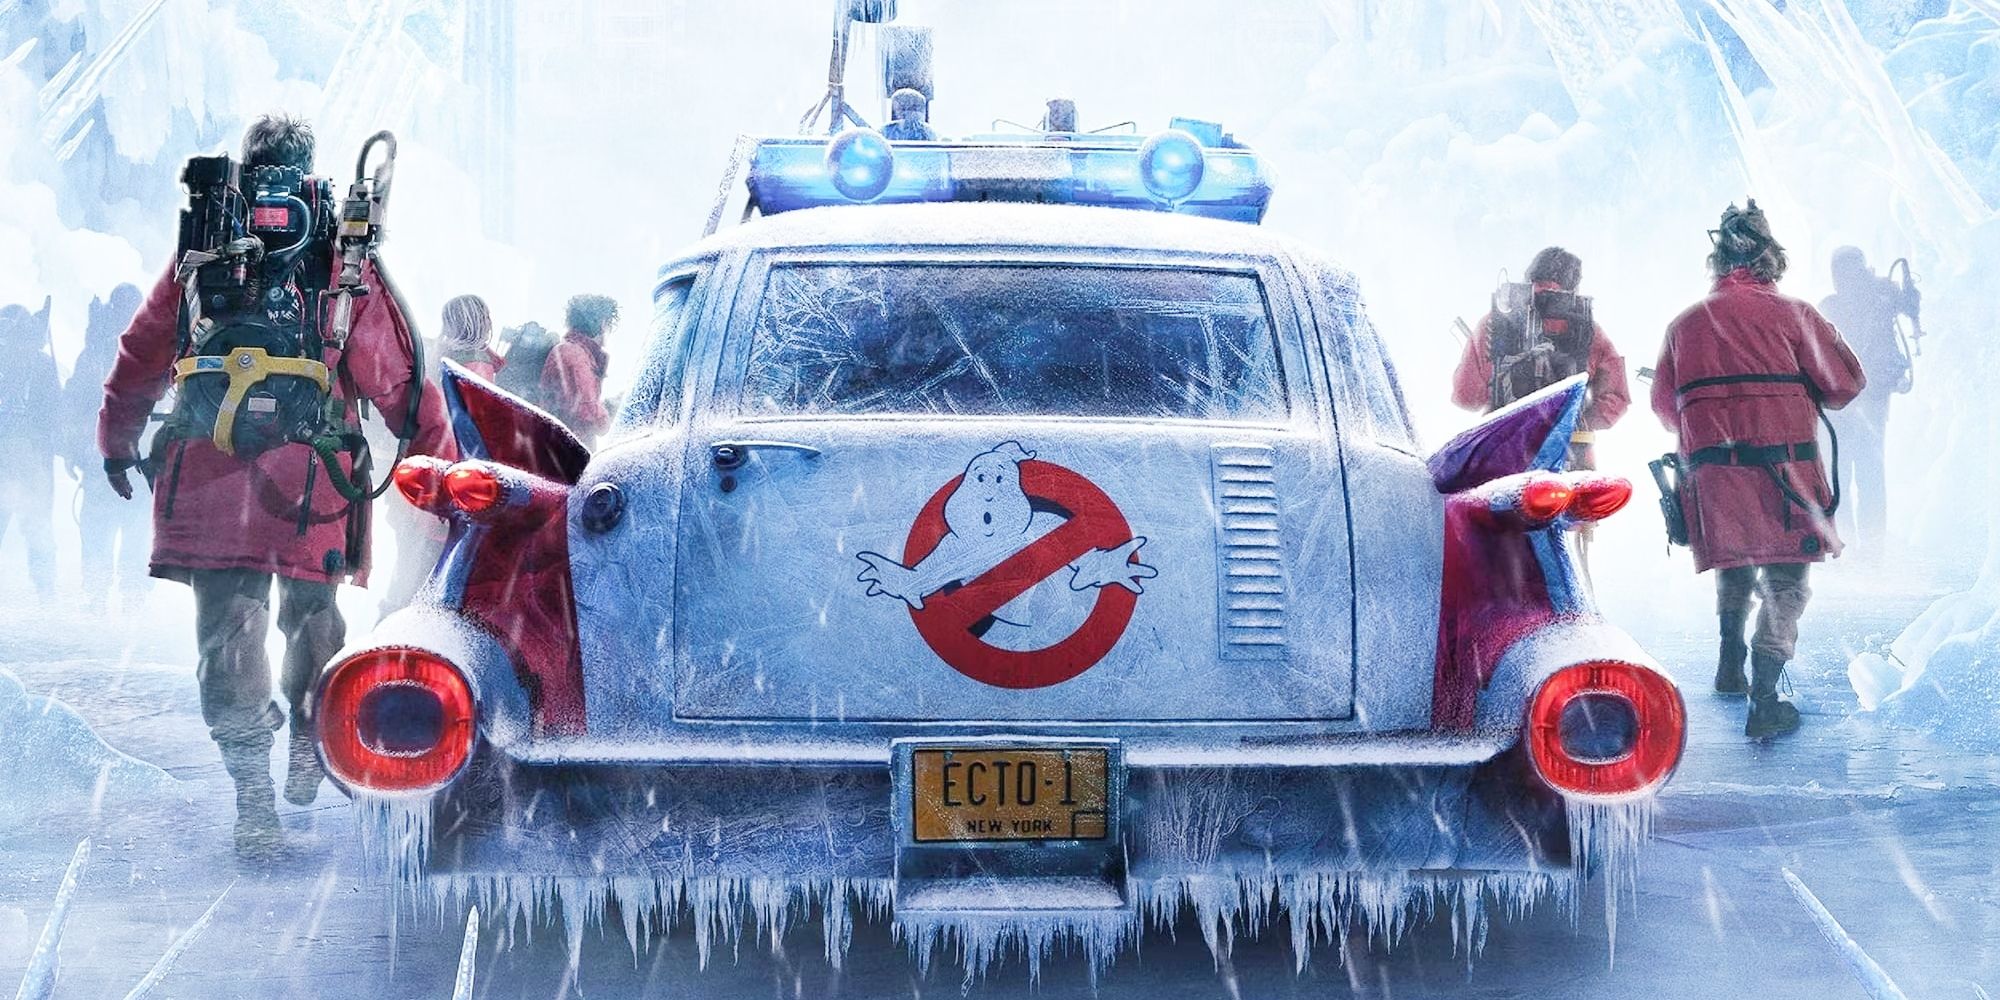 Ghostbusters: Frozen Empire poster reveals the Ecto 1 and the new team